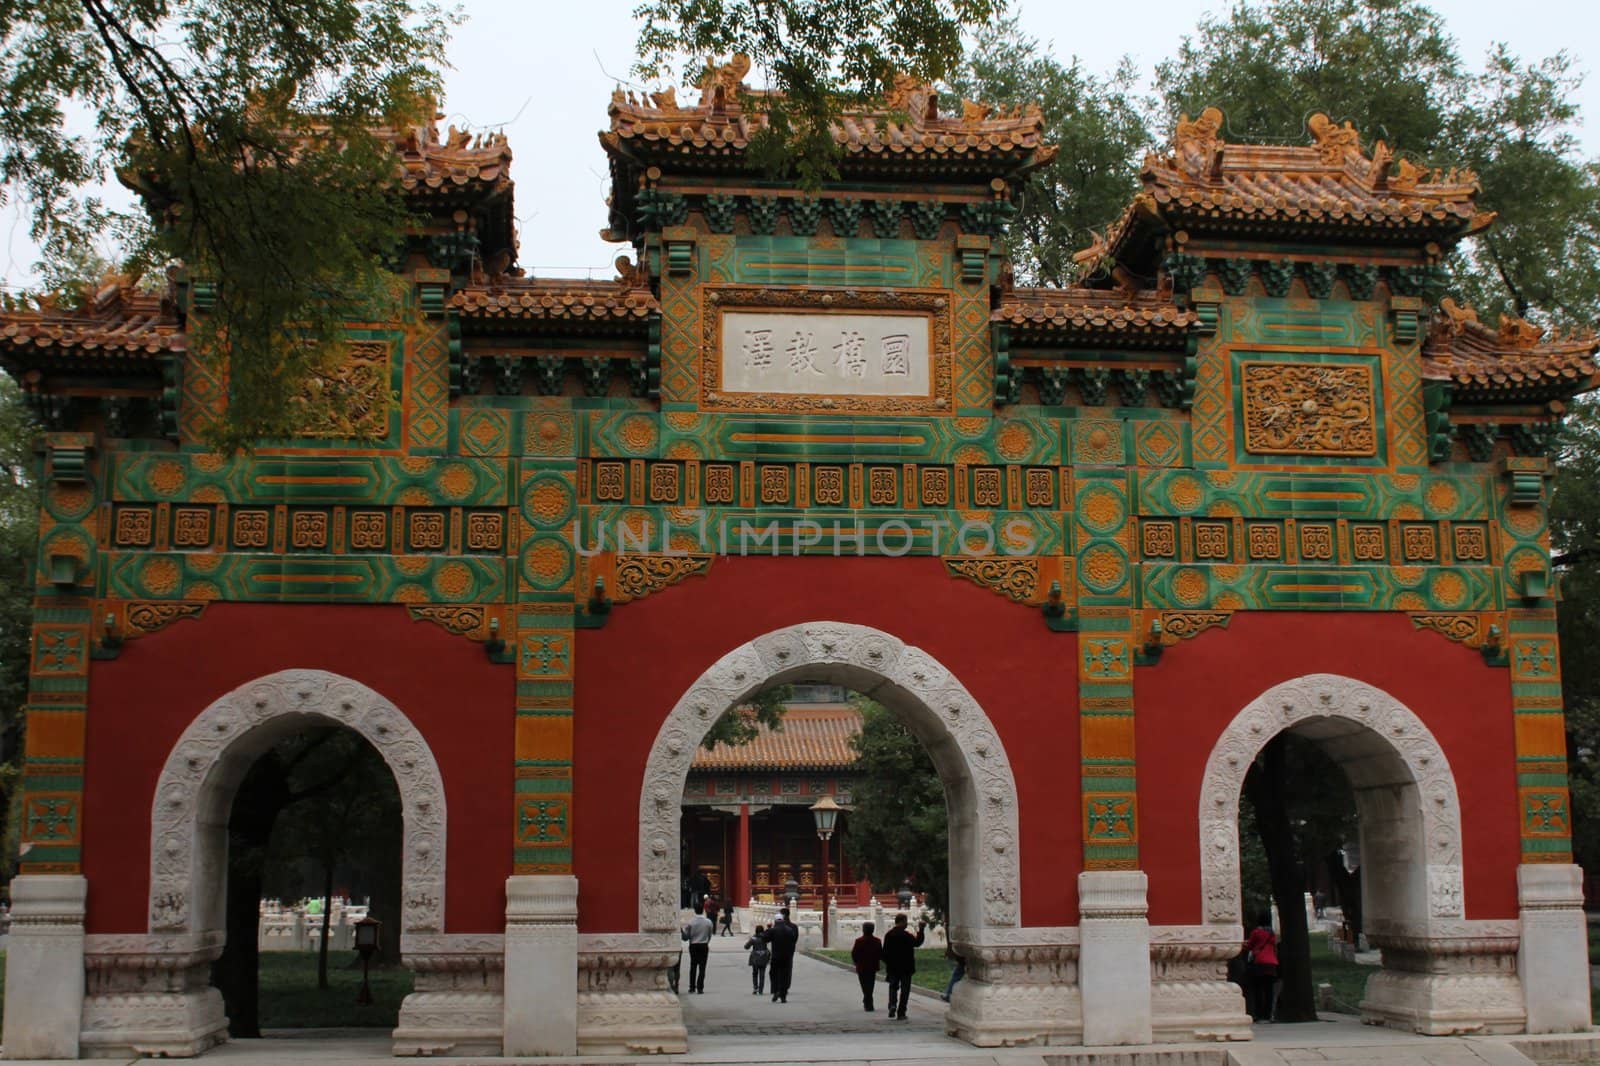 Entrance of Confucius temple in Beiing
